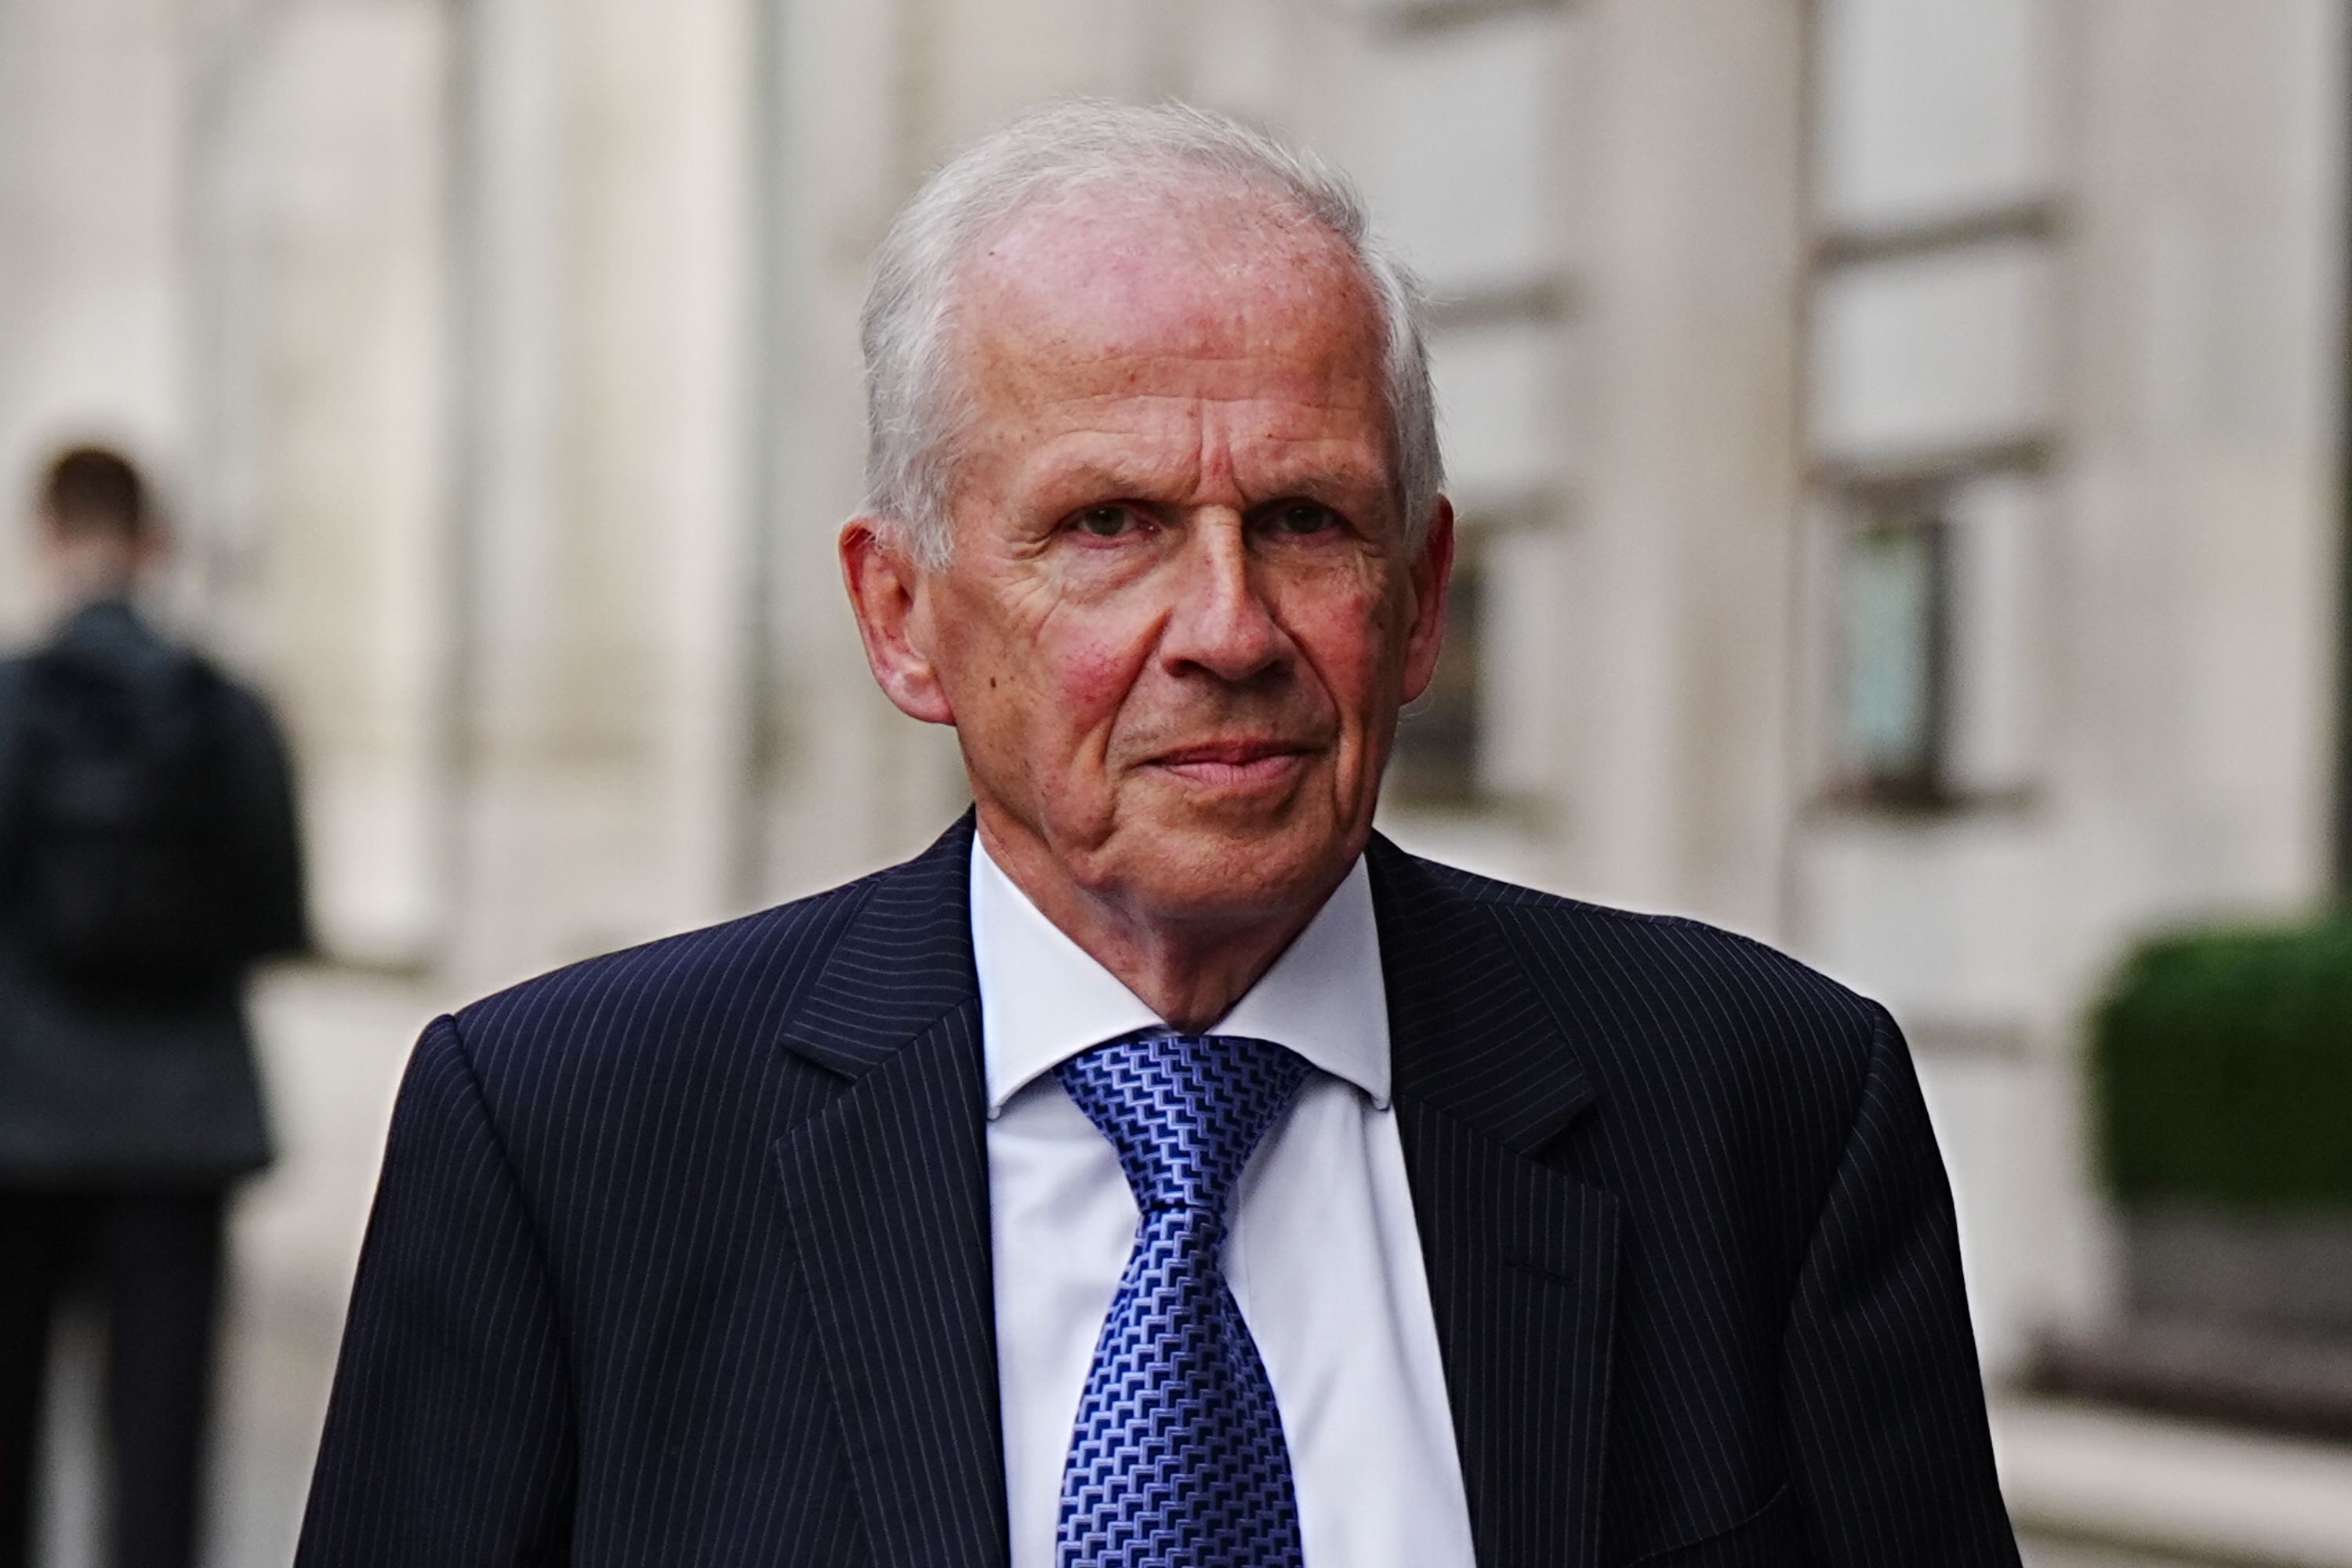 Alan Cook, former independent non-executive director and managing director of the Post Office gave evidence to the inquiry on Friday